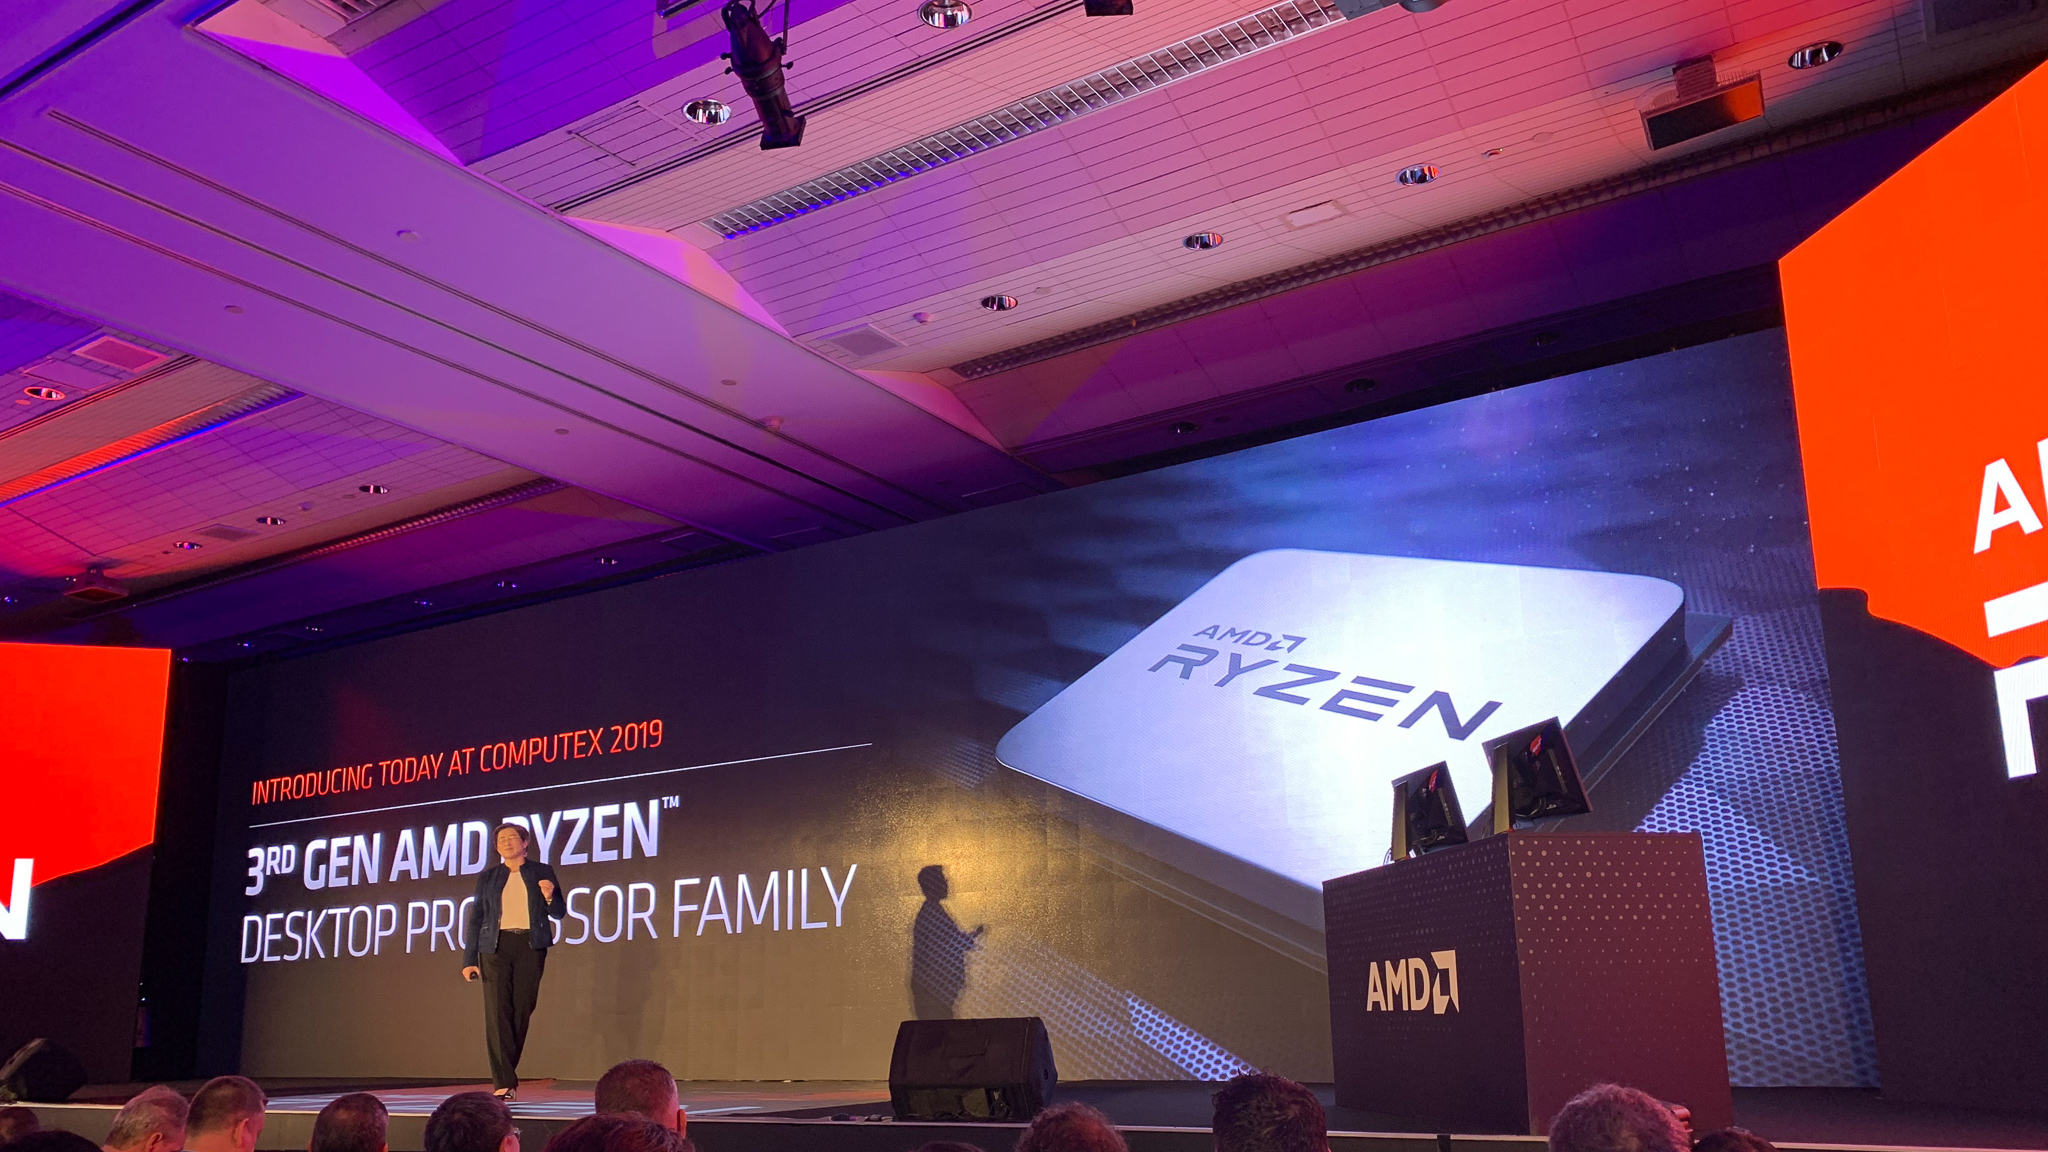 AMD presenting the AMD Ryzen 3rd Generation at CES 2019 